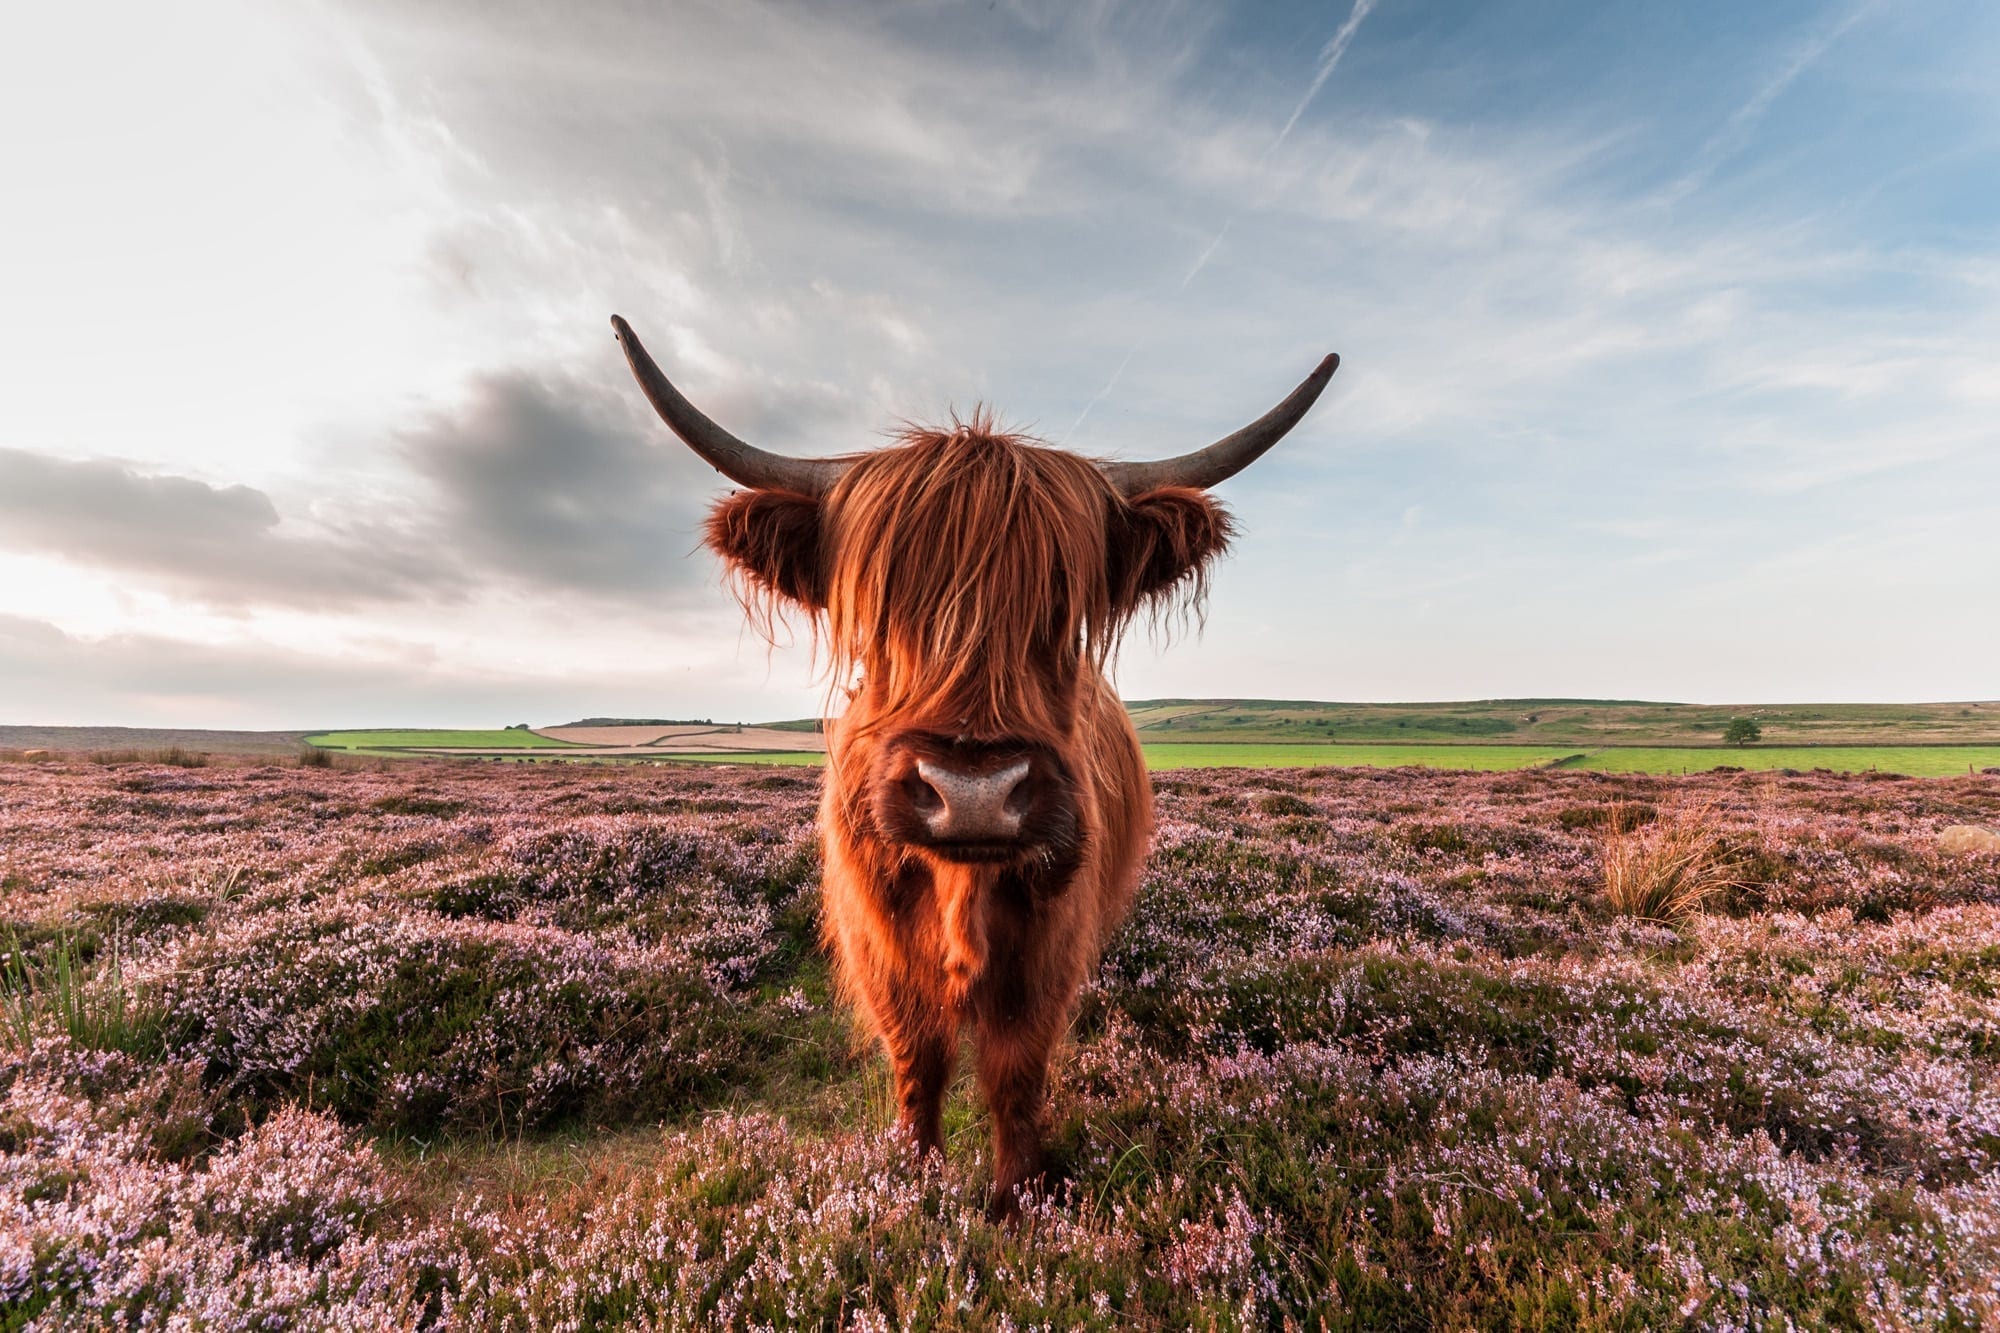 Are You Looking At Me? - Baslow Highland Cow - Peak District Photography